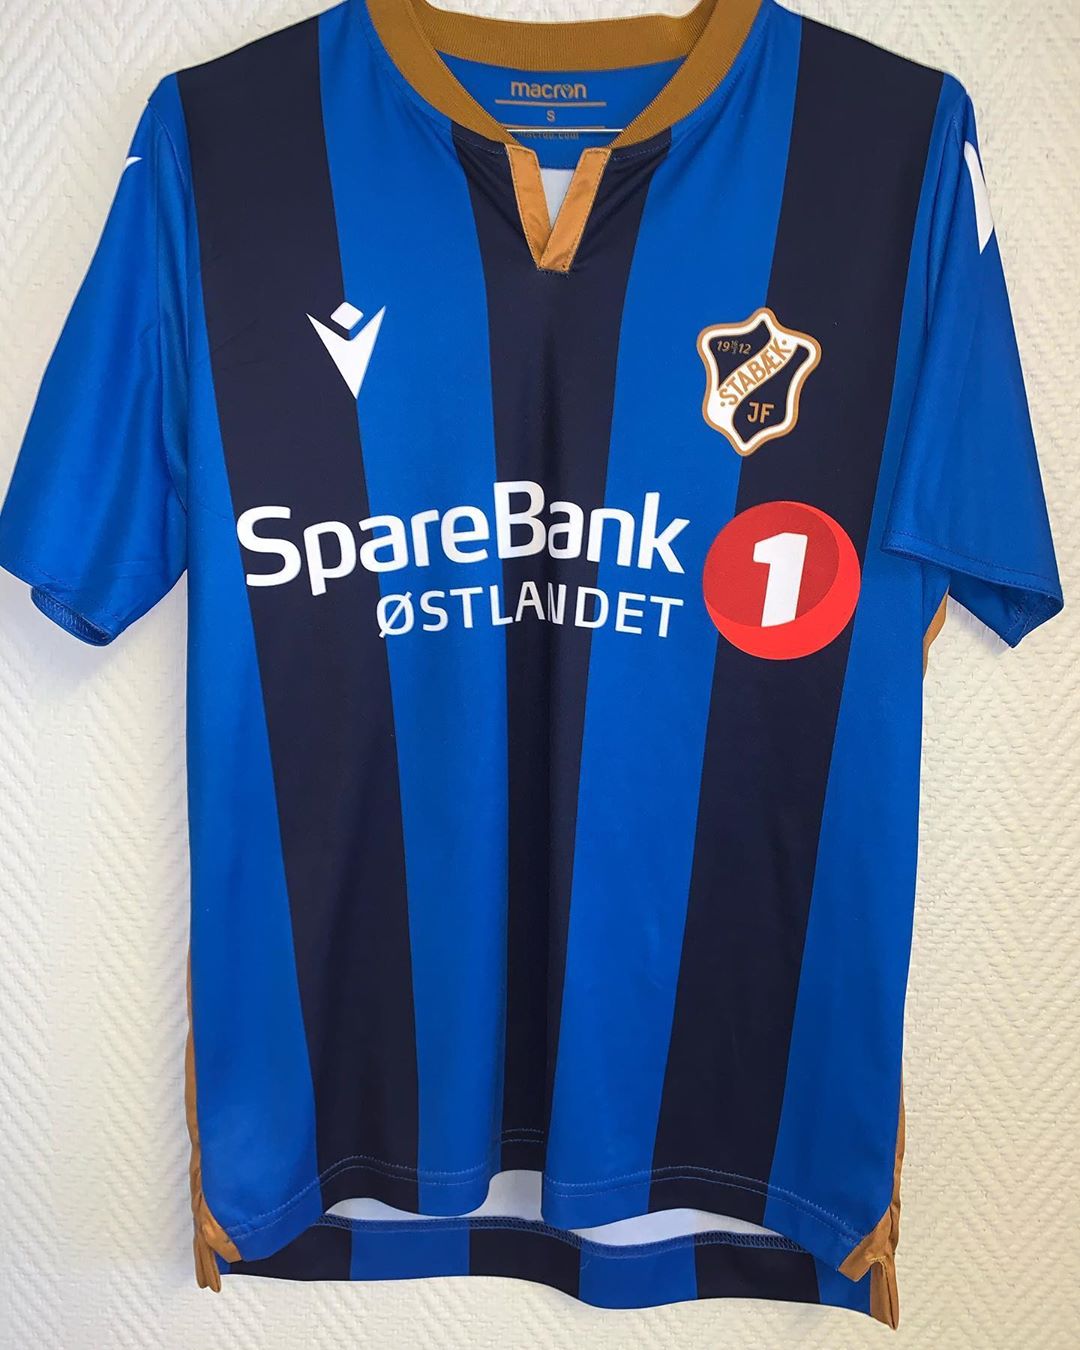 Stabæk Fotball Home 2019 Football Shirt Manufactured By Macron. The club plays football in Norway.